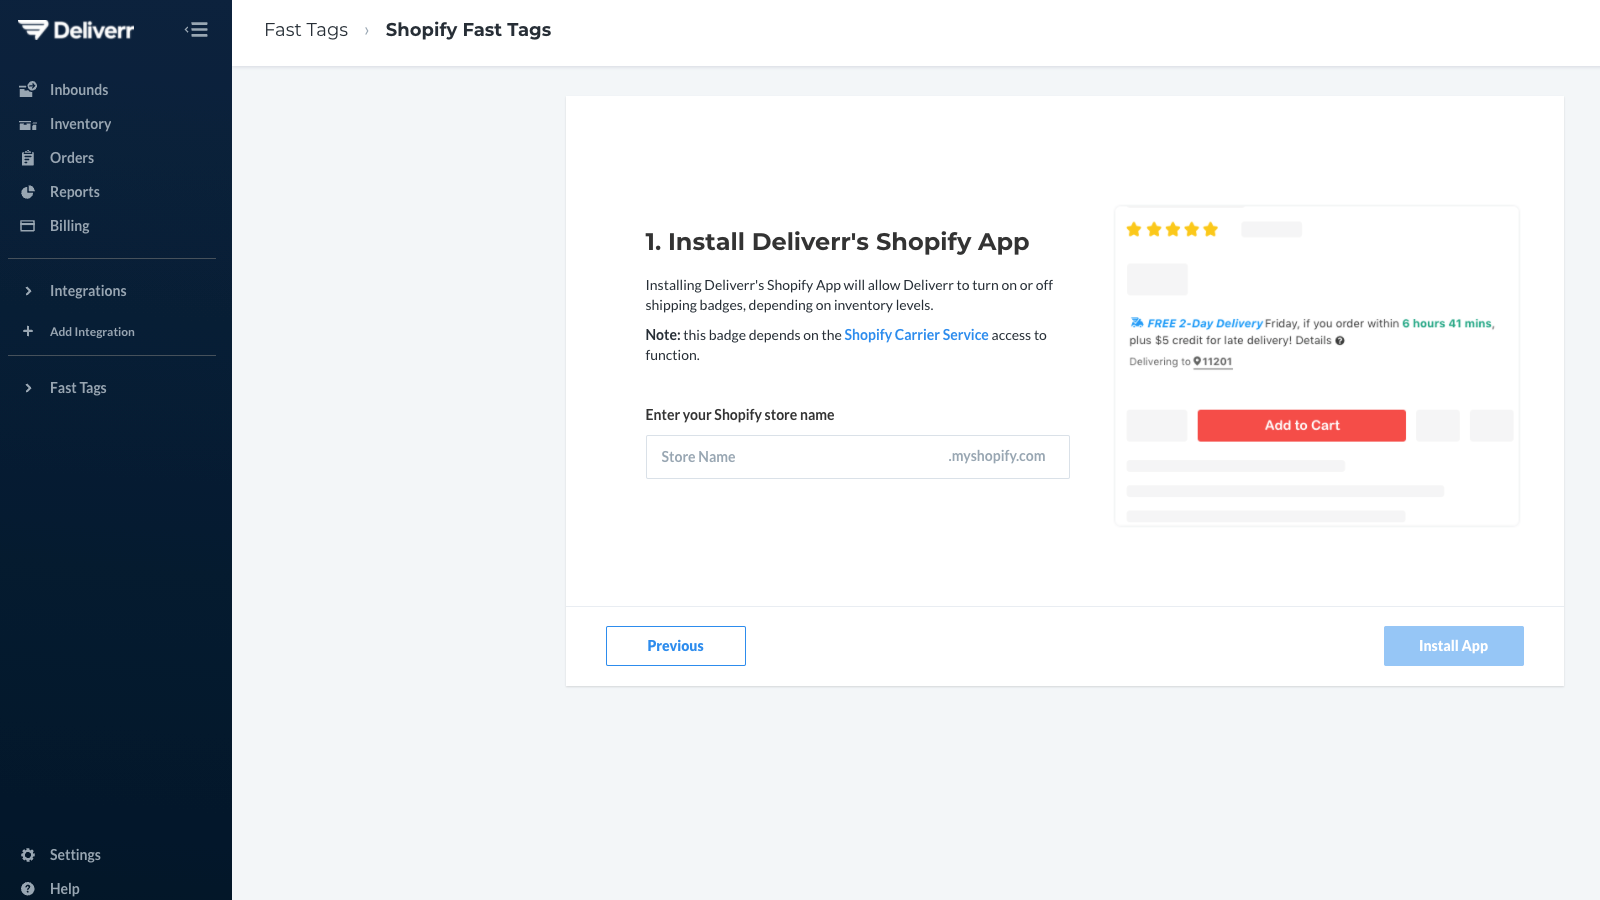 Add Fast Tag to your Shopify Store